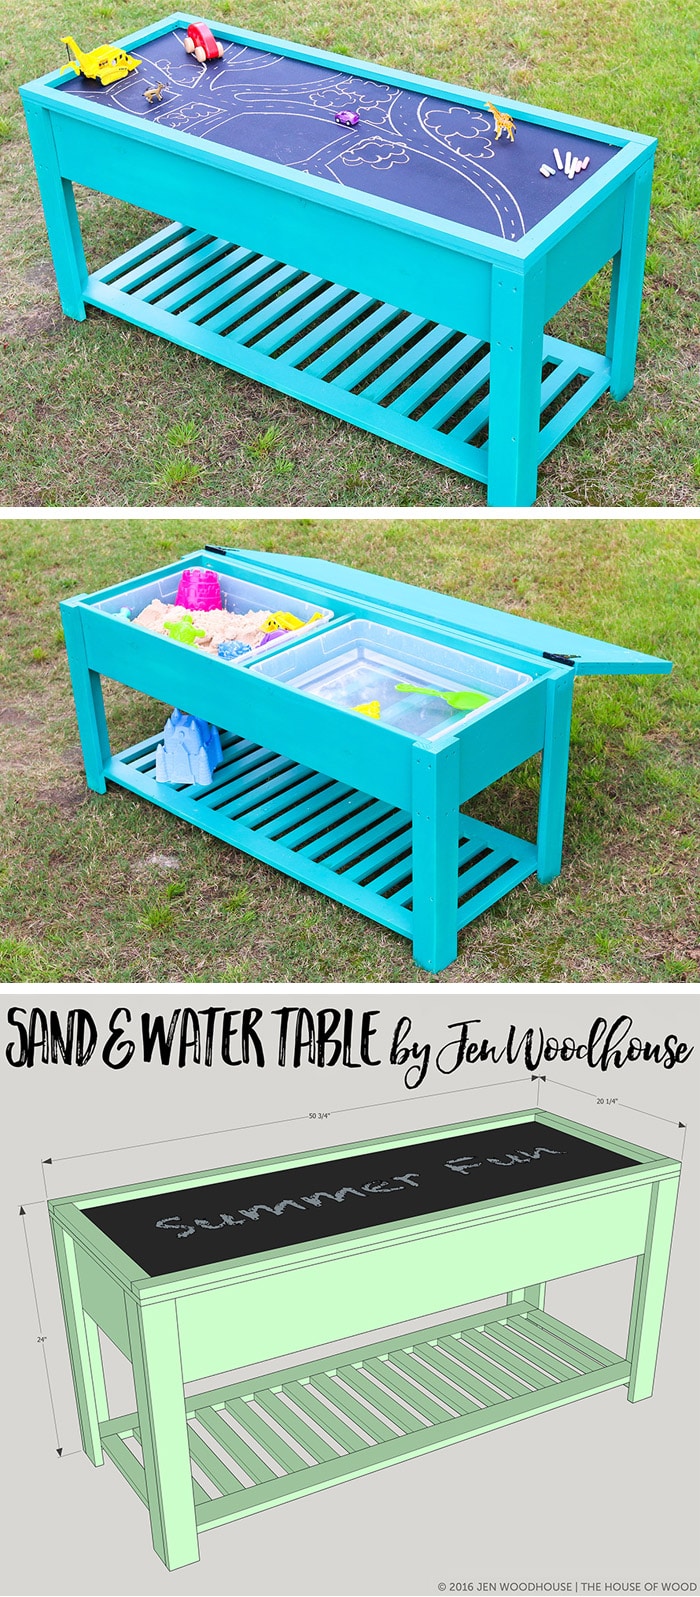 Learn how to build a fun DIY sand and water table for your kids! Free plans by Jen Woodhouse